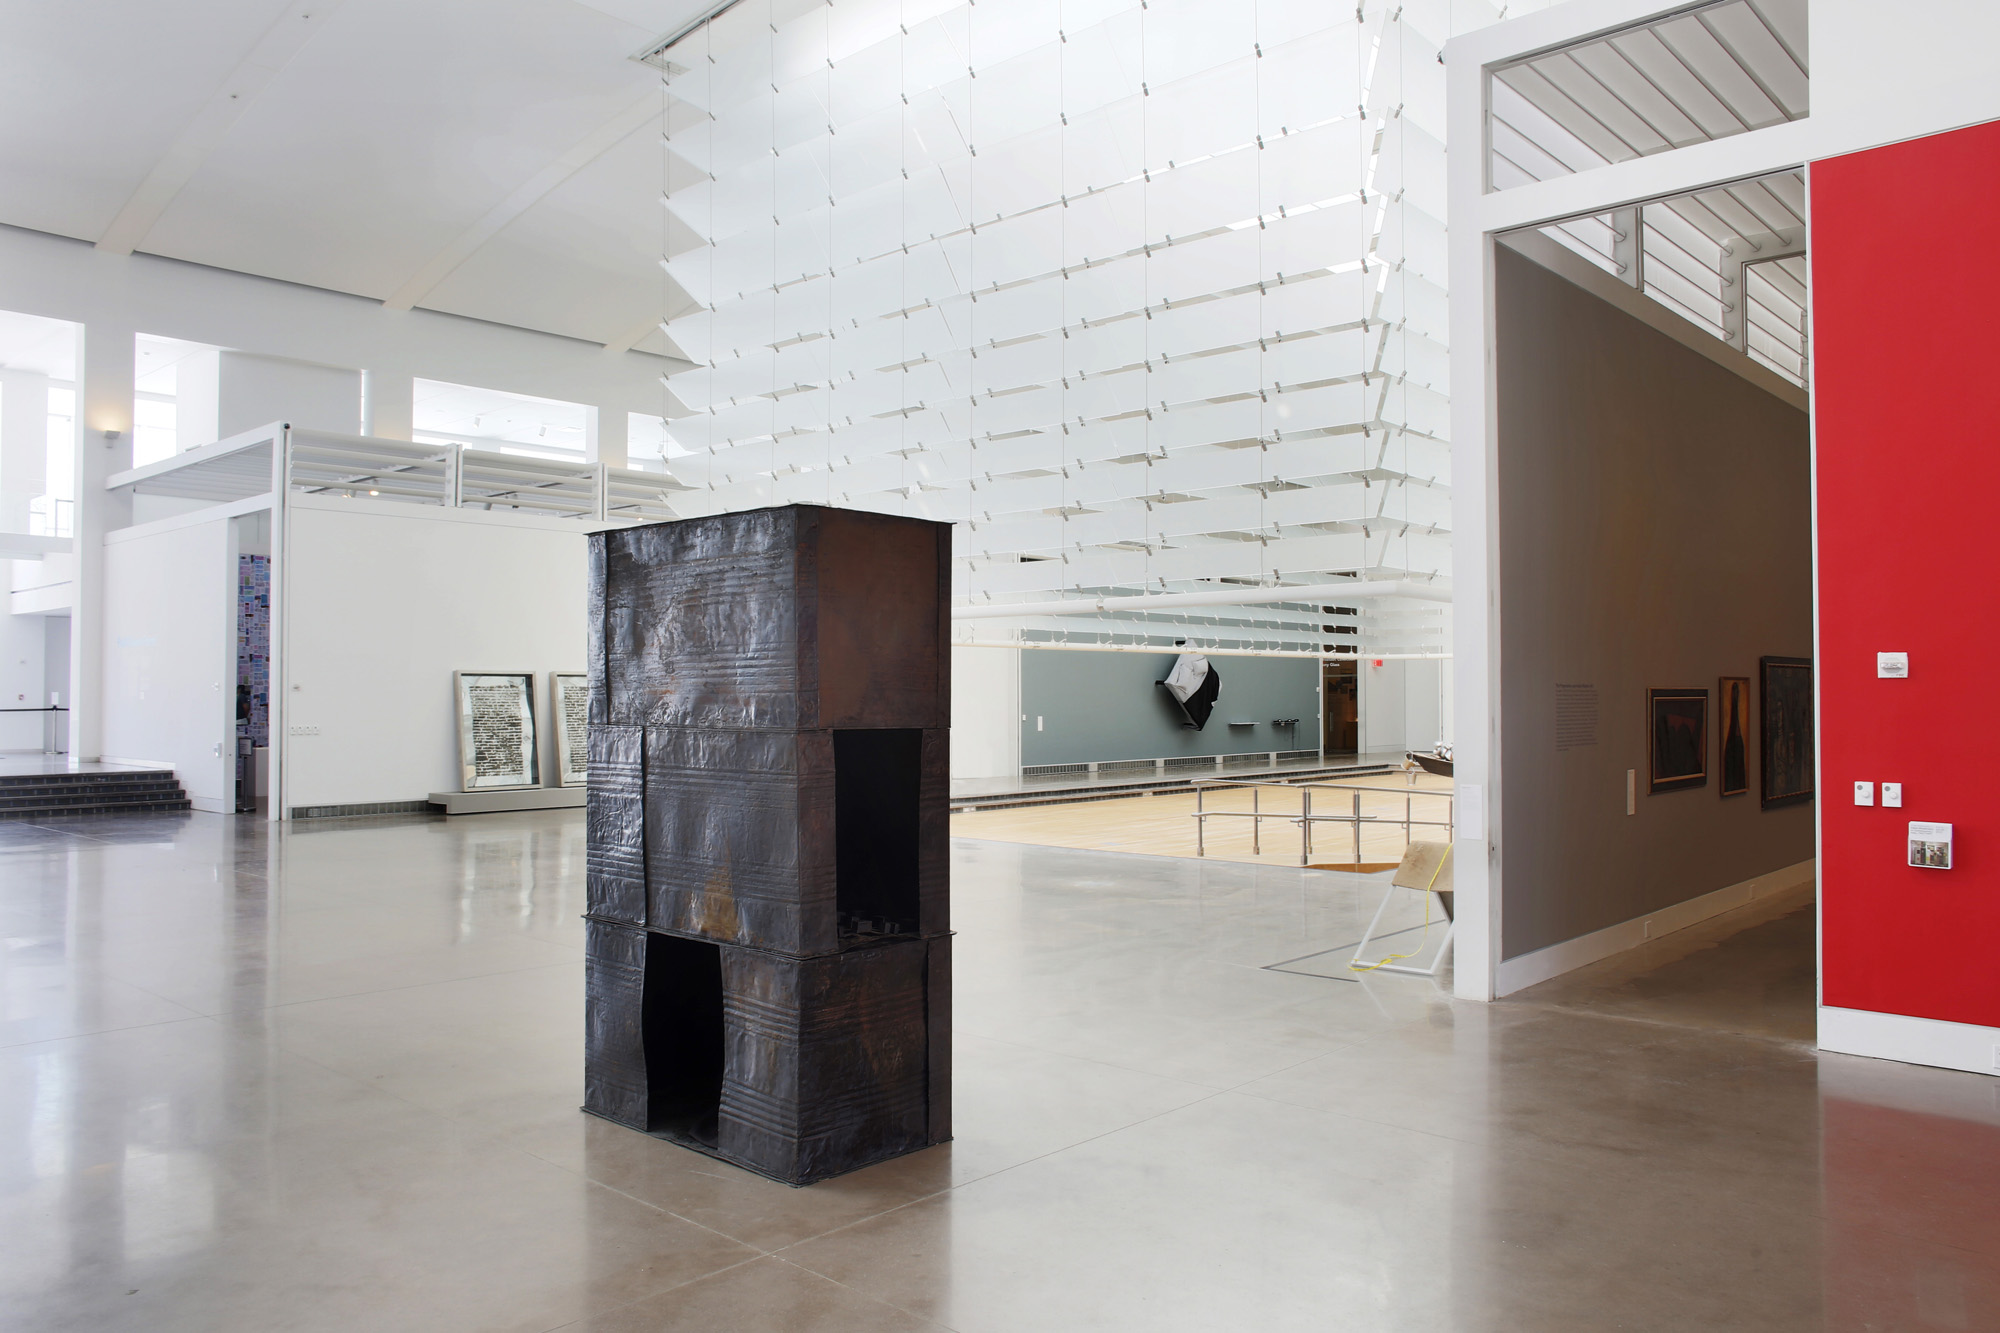 A rectangular-prism shaped sculpture made out of tar drum sheets, installed on an empty exhibition floor. In the background are entryways to other exhibition spaces.